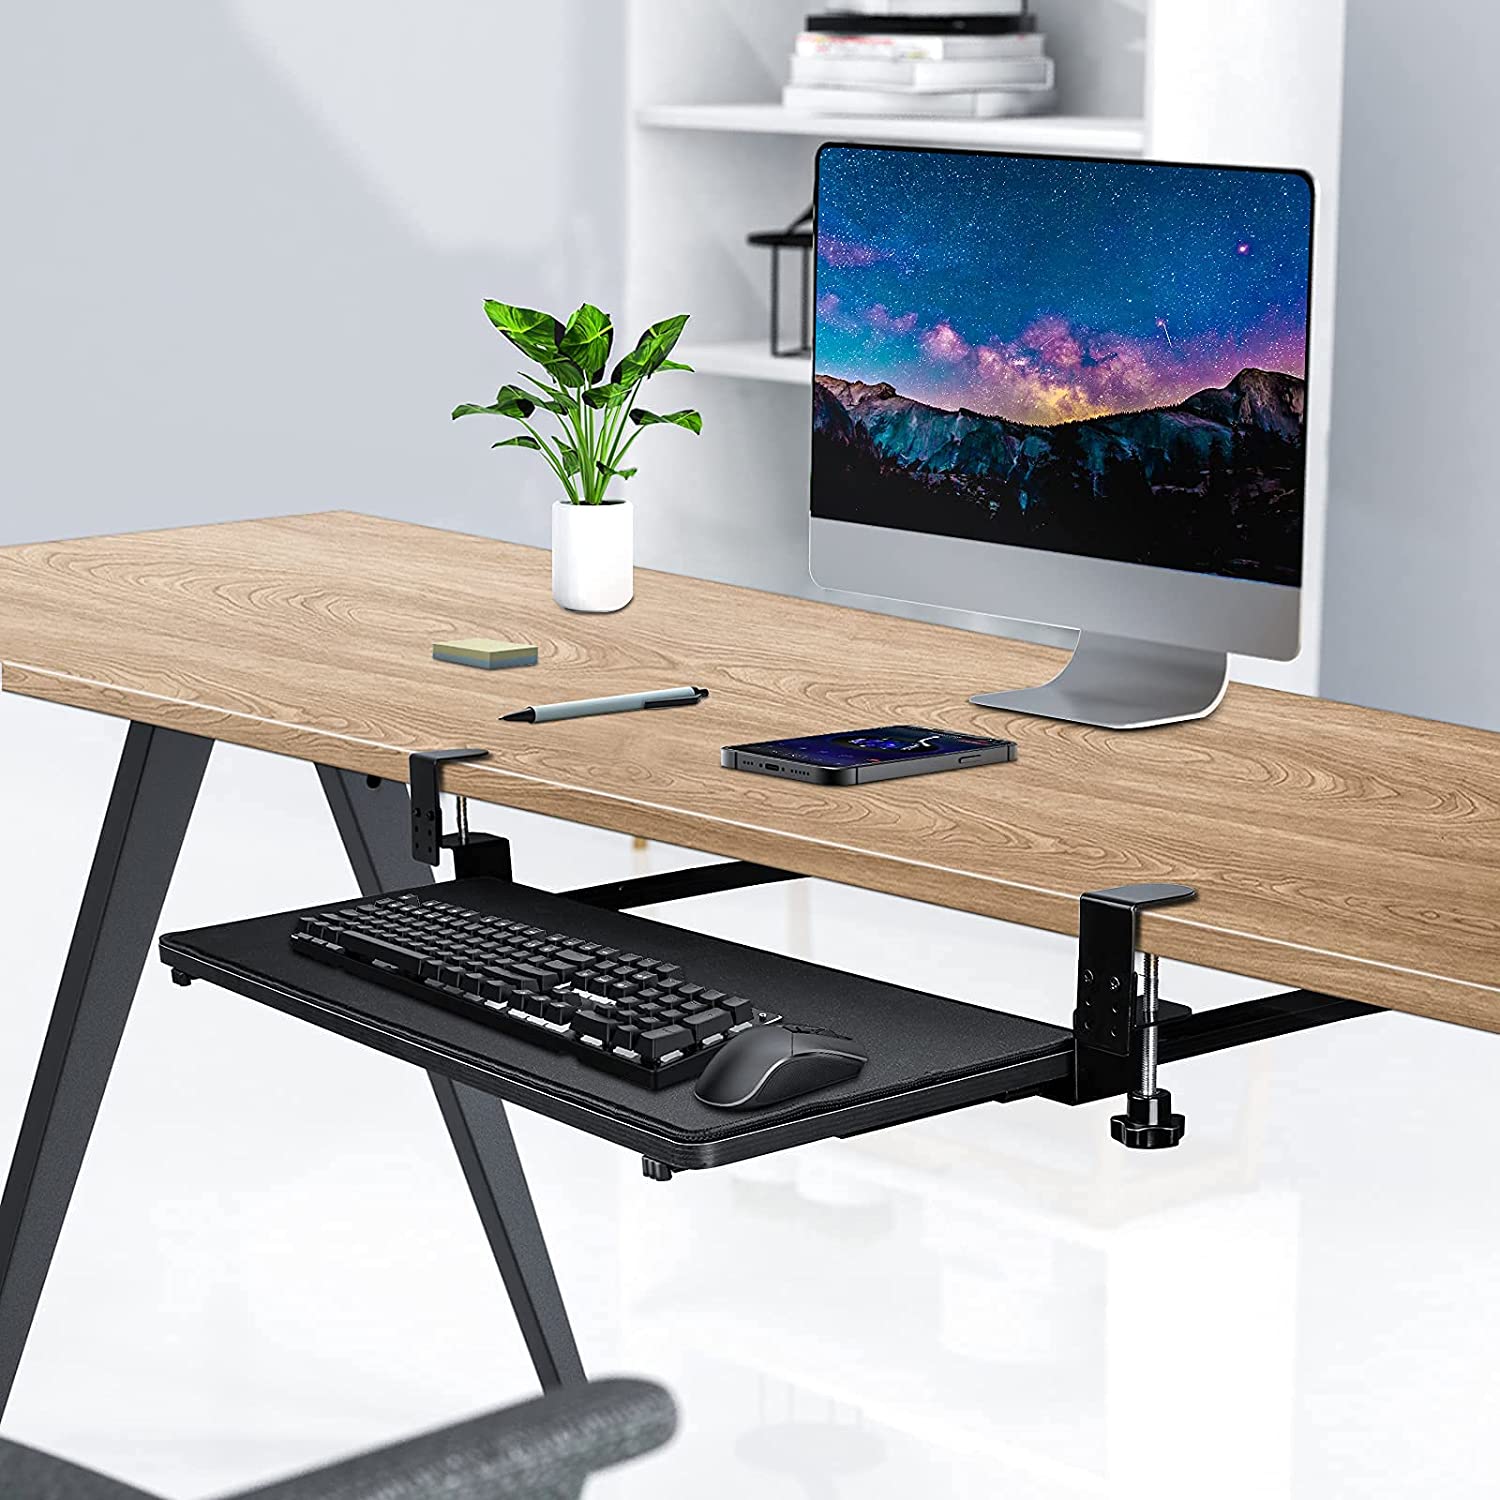 HAVIT HV-KT2101 Under Desk Keyboard Tray with Full Size Mouse Pad & C Clamp Mount System